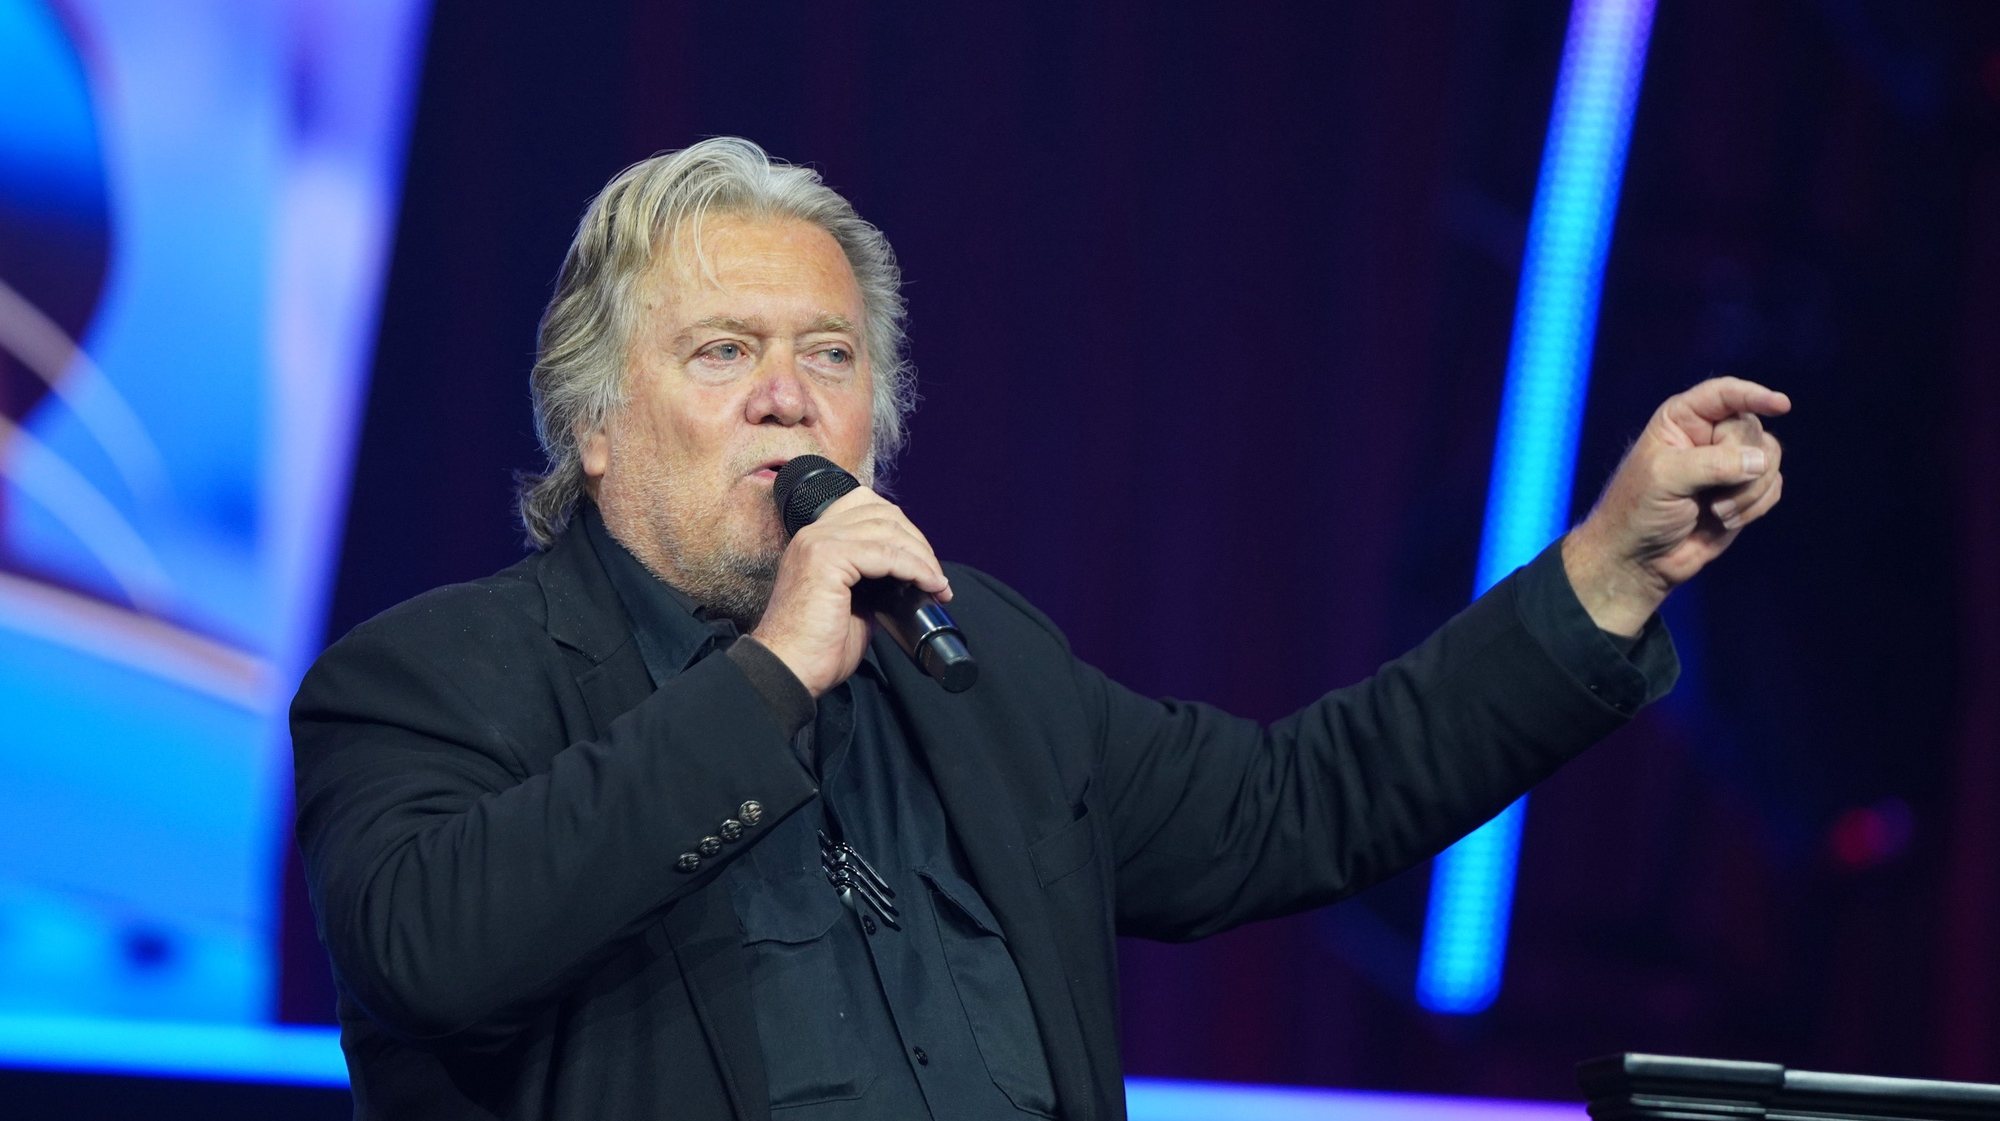 epa11413380 Steve Bannon, former senior counselor to former president Donald J. Trump, speaks at The People’s Convention, a gathering of prominent conservatives organized by the political group Turning Point Action, in Detroit, Michigan, USA, 15 June 2024.  EPA/DIEU-NIALO CHERY